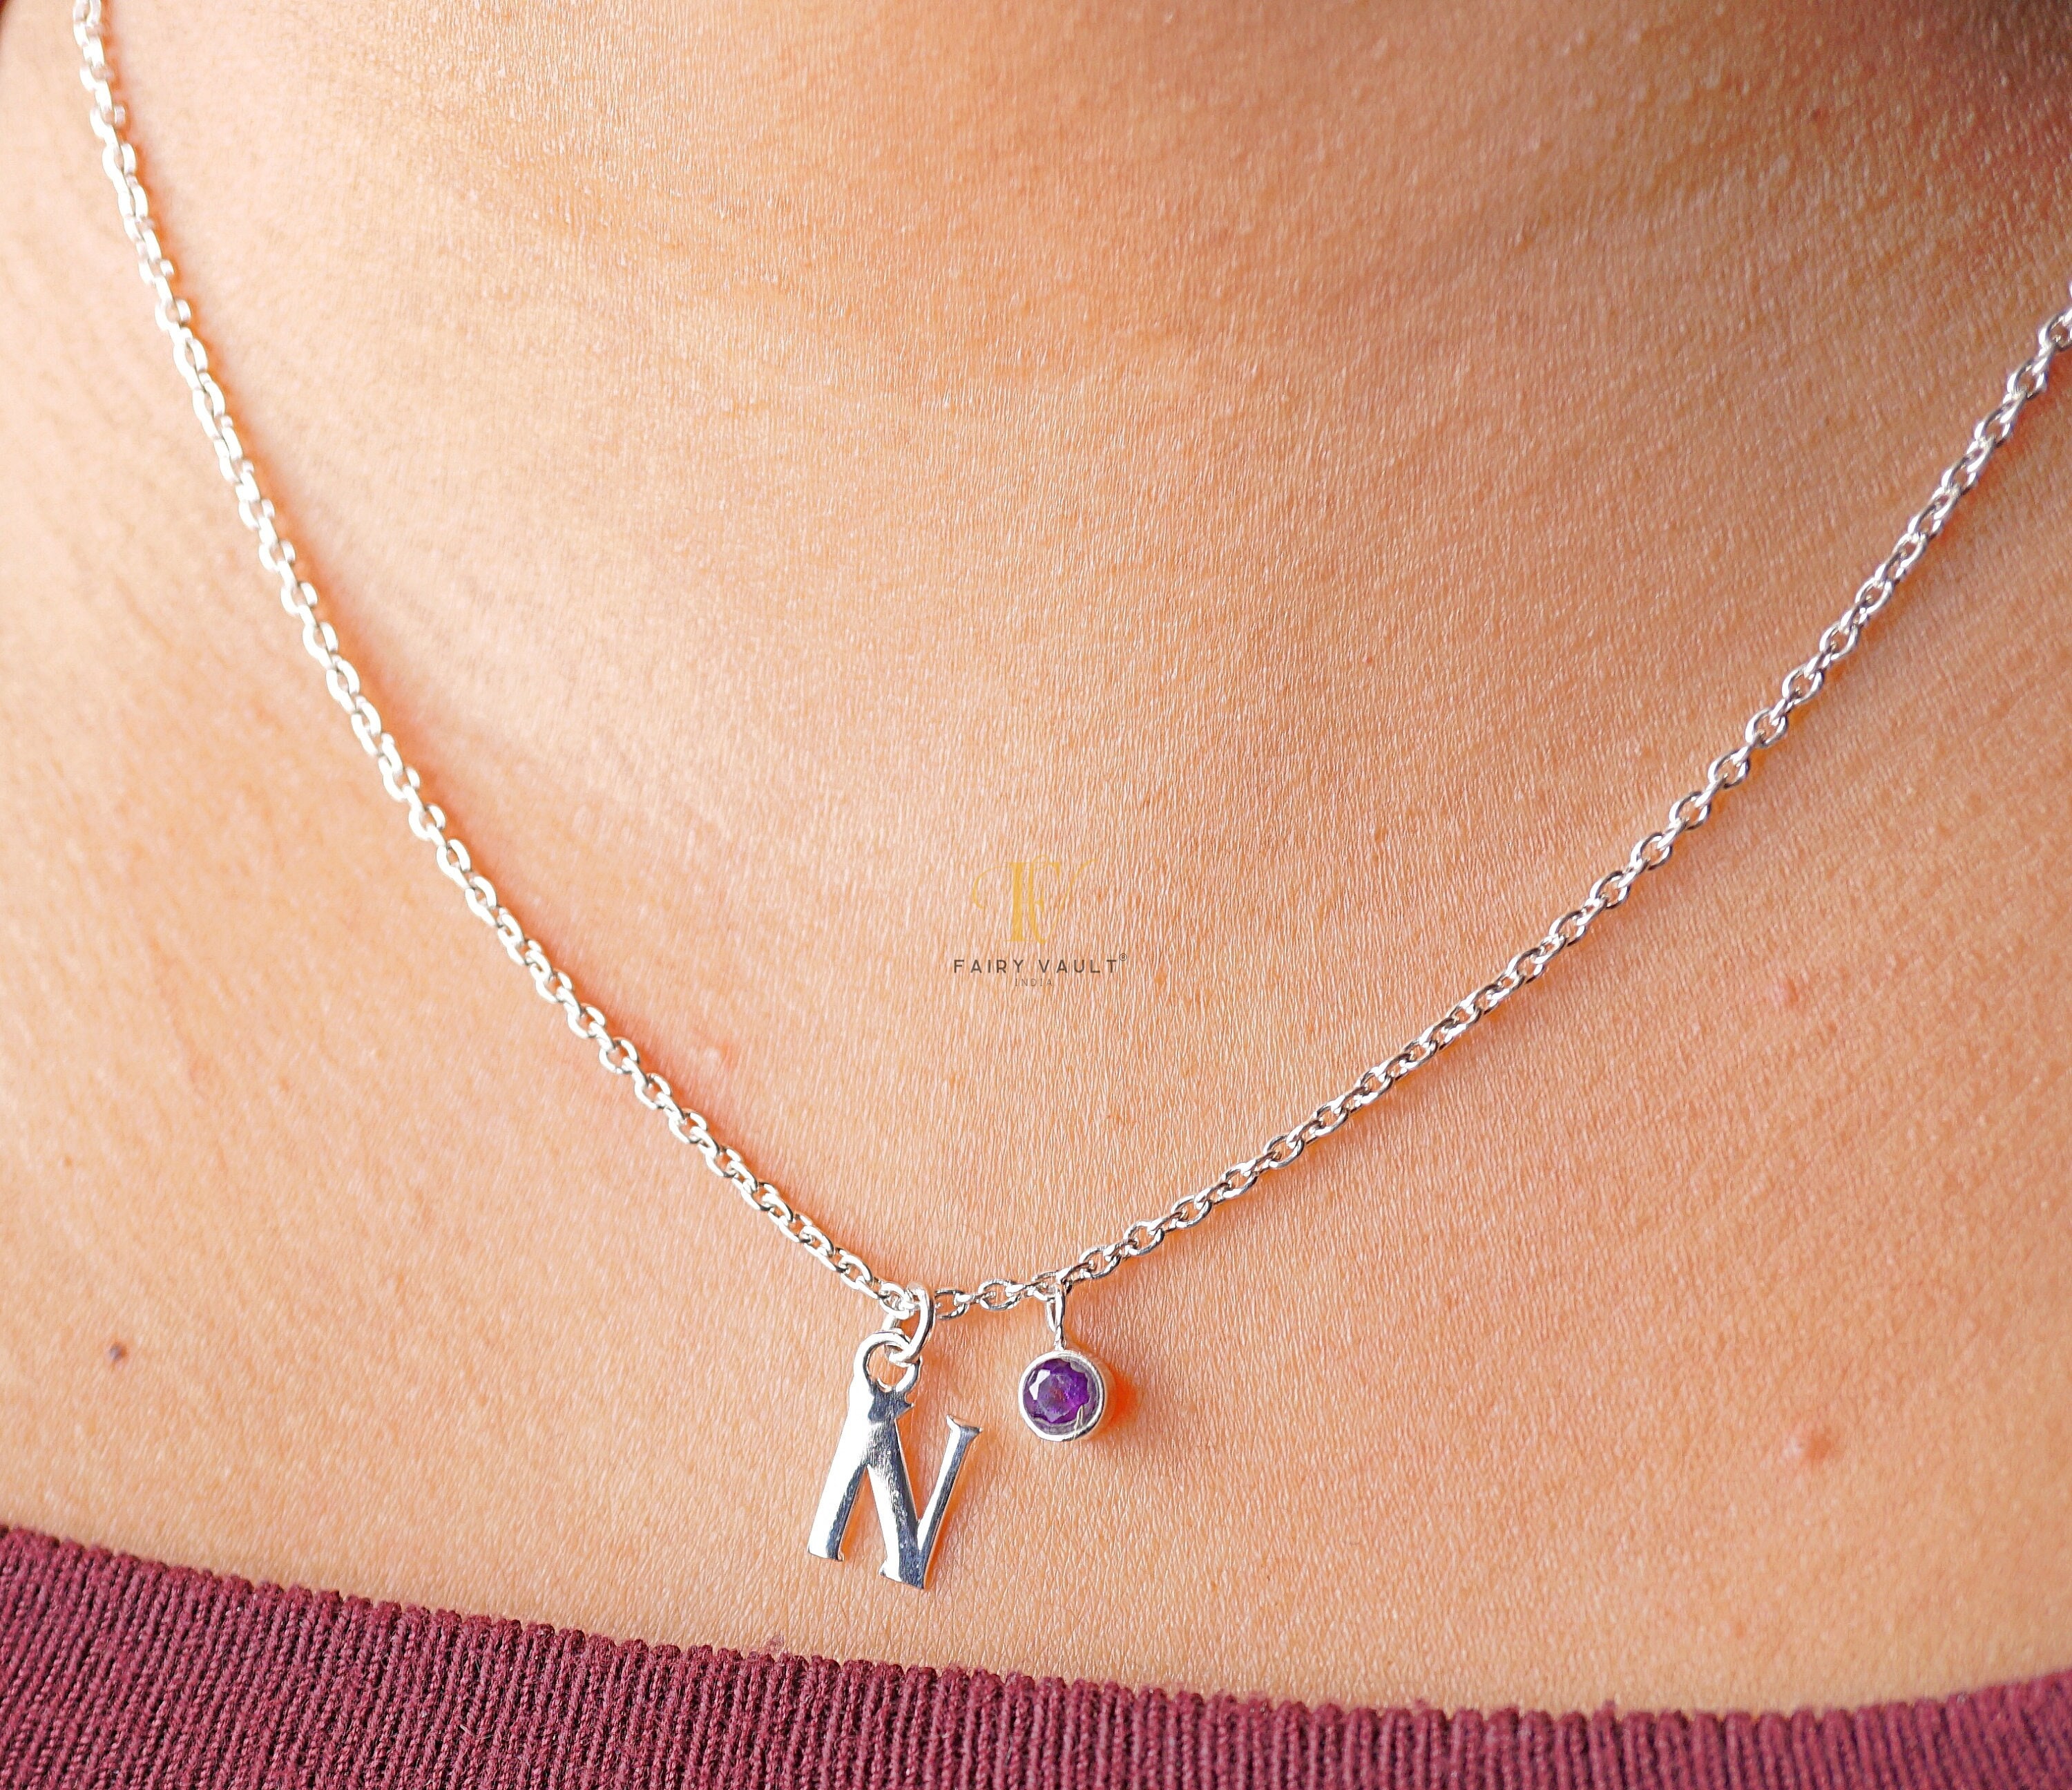 Custom Initial and Birthstone Necklace, Personalized Letter Necklace Gift |  eBay